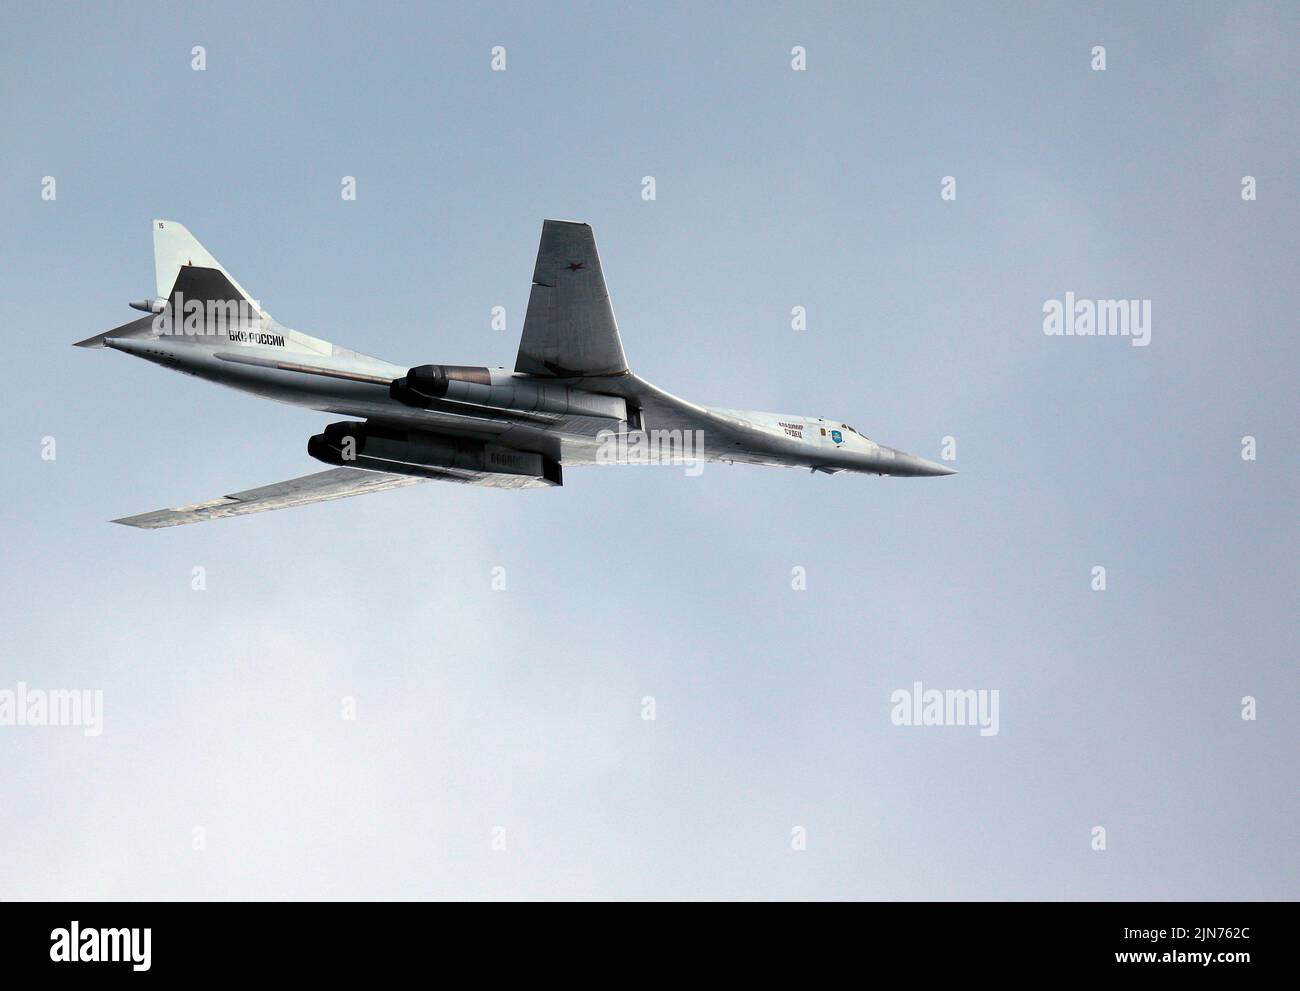 Aviation holiday 'I choose the sky', dedicated to the Day of the Russian Air Force. Show by long-range aircraft in the sky.  06.08.2022 Russia, Tatarstan, Kazan Photo credit: Danila Egorov/Kommersant/Sipa USA Stock Photo